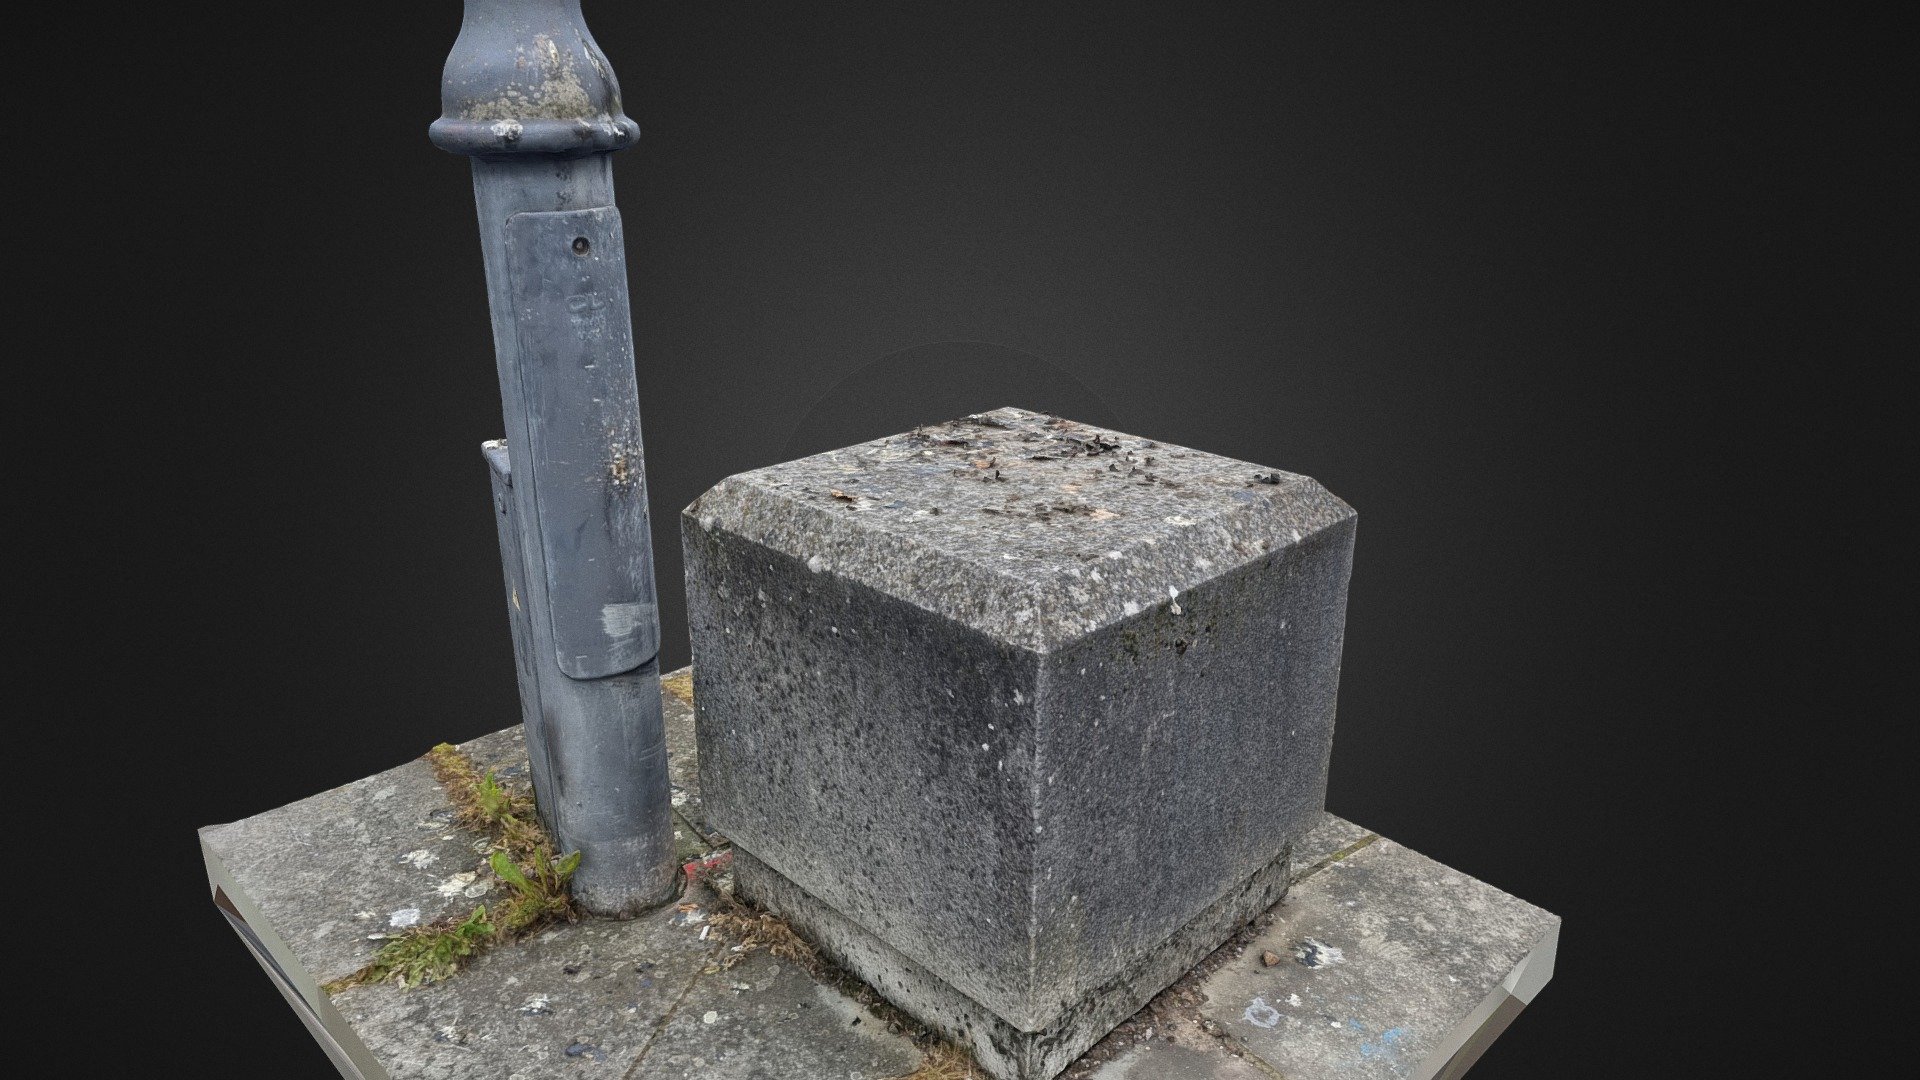 Photoscan of a pole car blocker made to also looke nice 
old and dirty look , base of the lightpole visible.

Created in RealityCapture from 262 images - Cement Street Decoration Old and Dirty - Buy Royalty Free 3D model by DAC Photoscan (@DACPhotoscans) 3d model